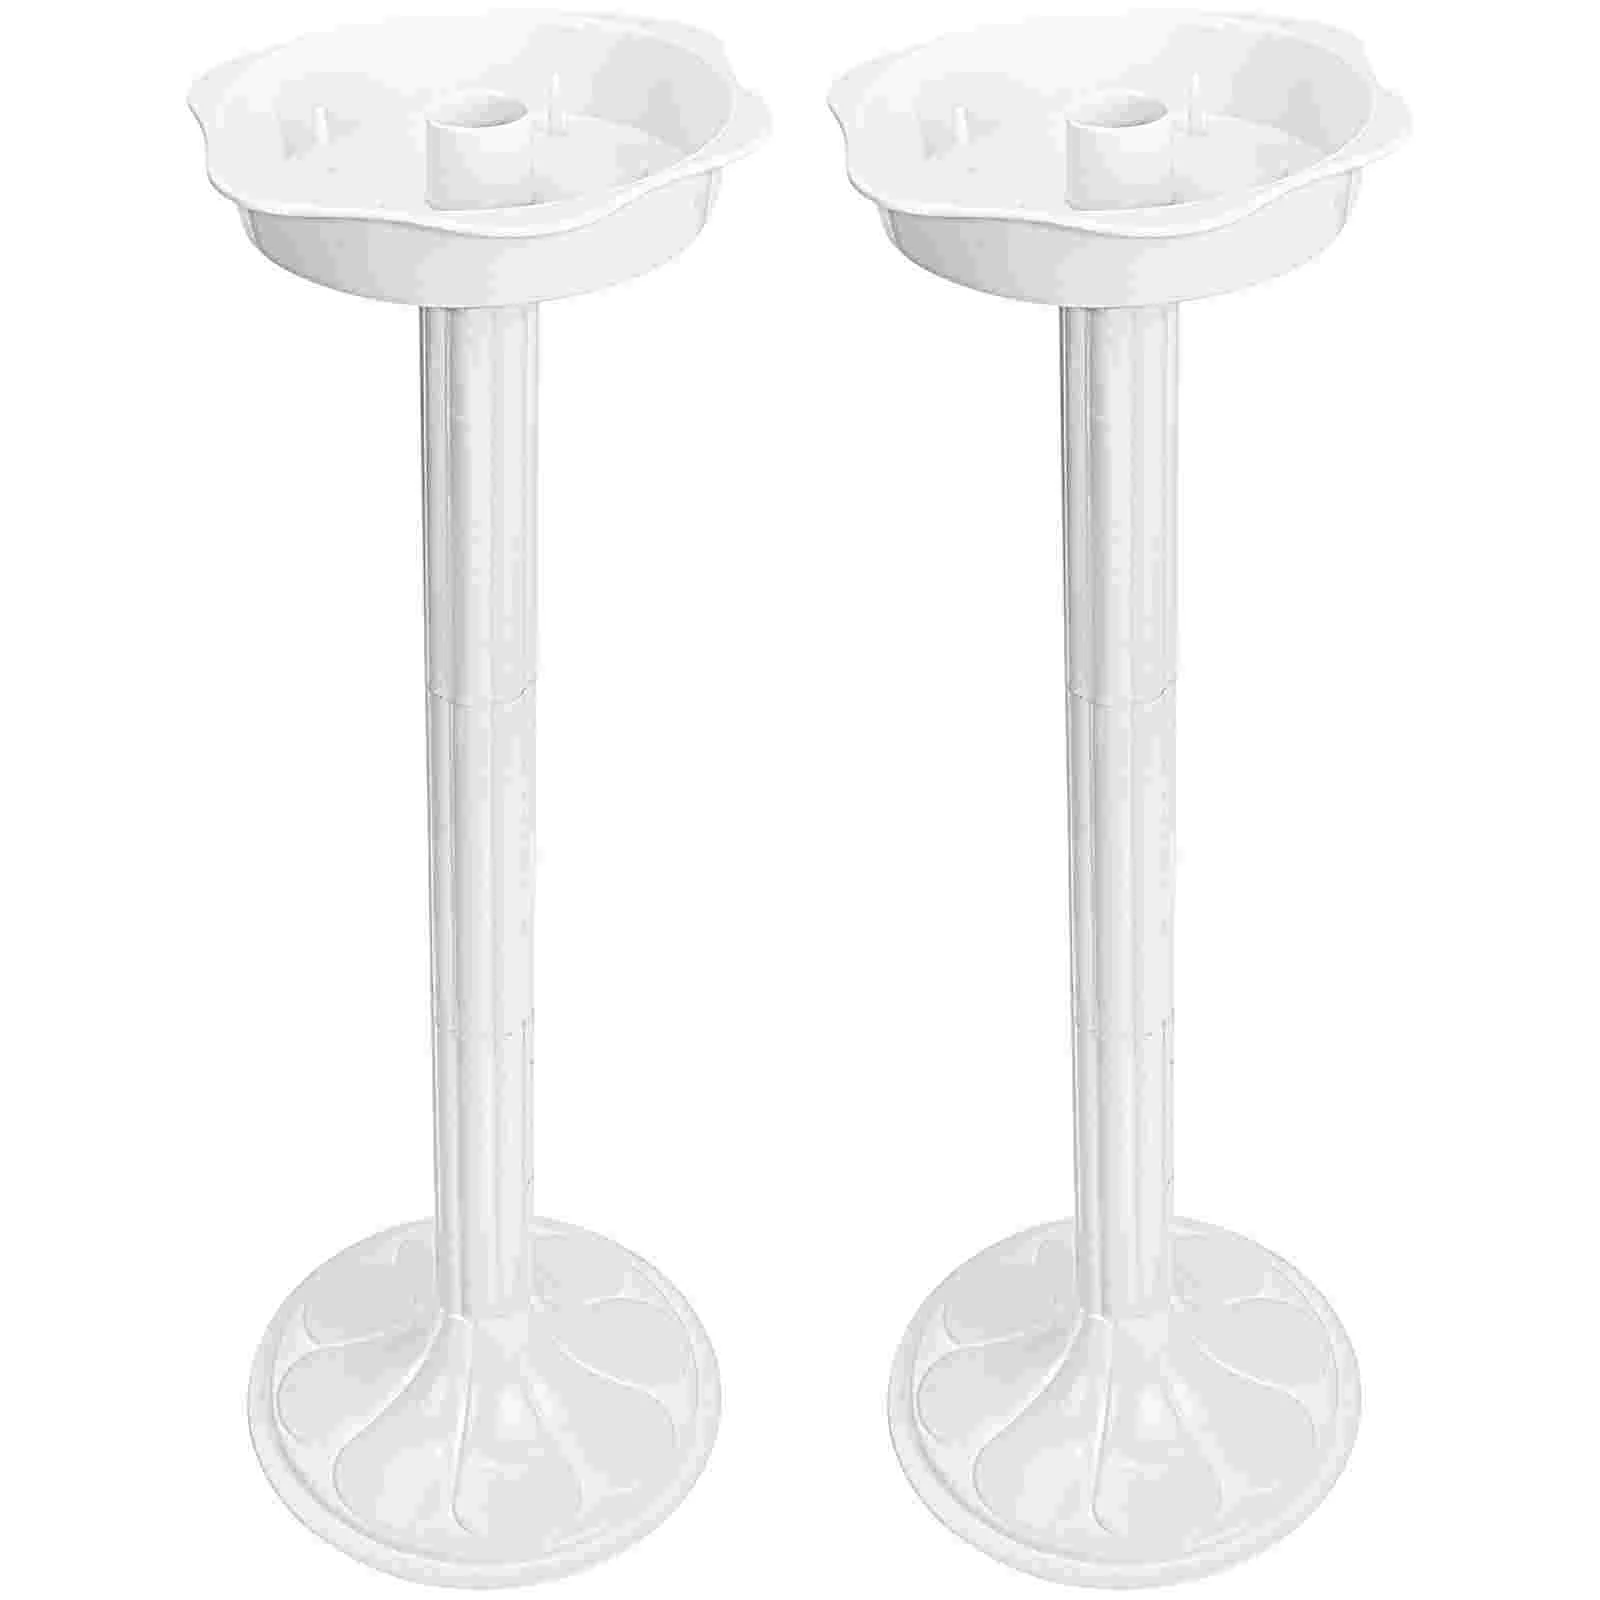 

2 Pcs Plastic Pots Outdoor Lu Yin Style Road Guiding Prop Props White Wedding Party Supply Flowerpot Holder Marriage column